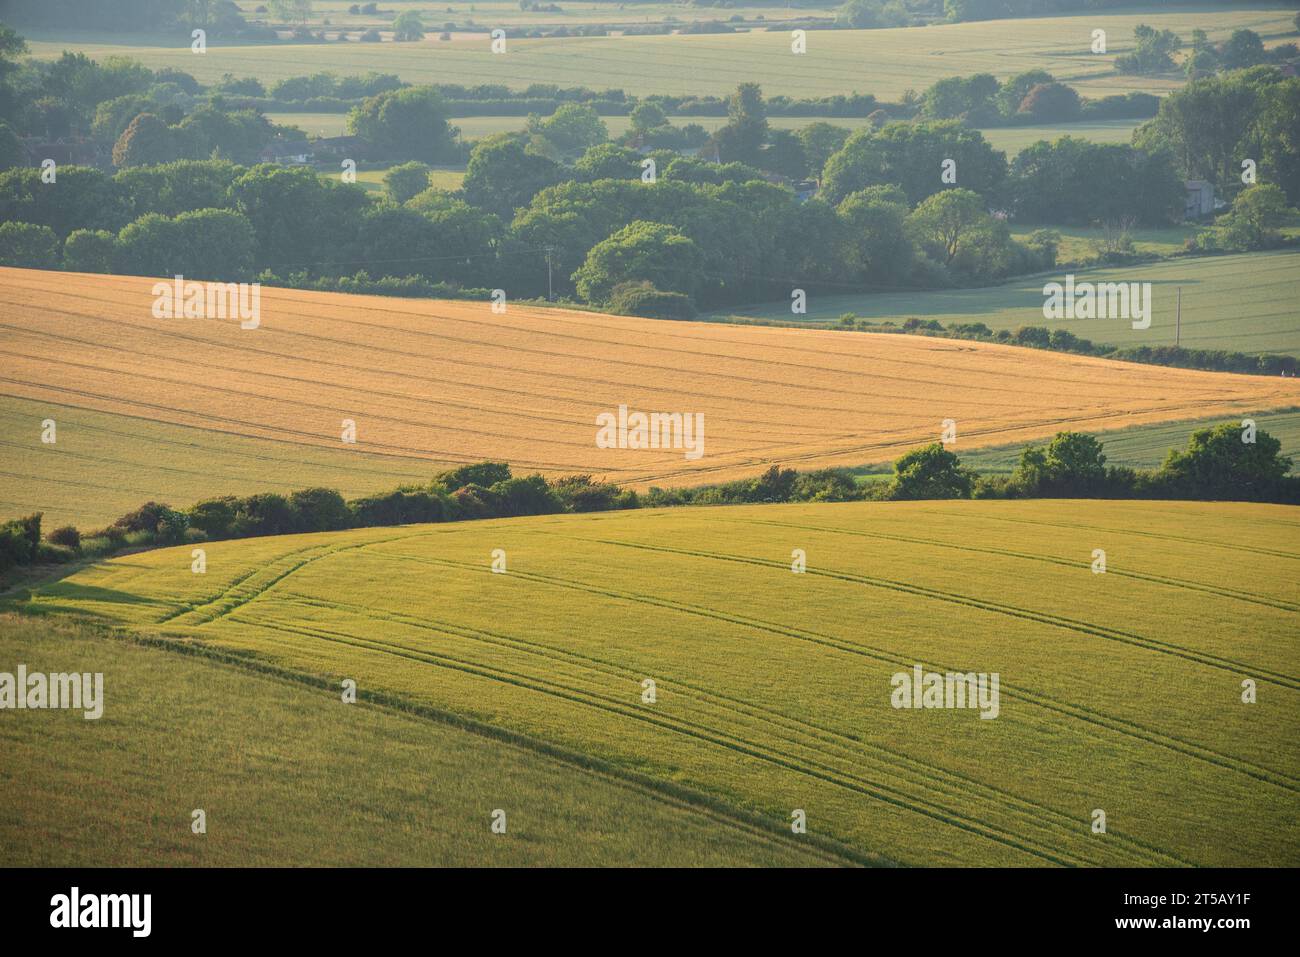 Beautiful Summer sunset from Firle Beacon in South Downs National Park in beautiful English countryside Stock Photo